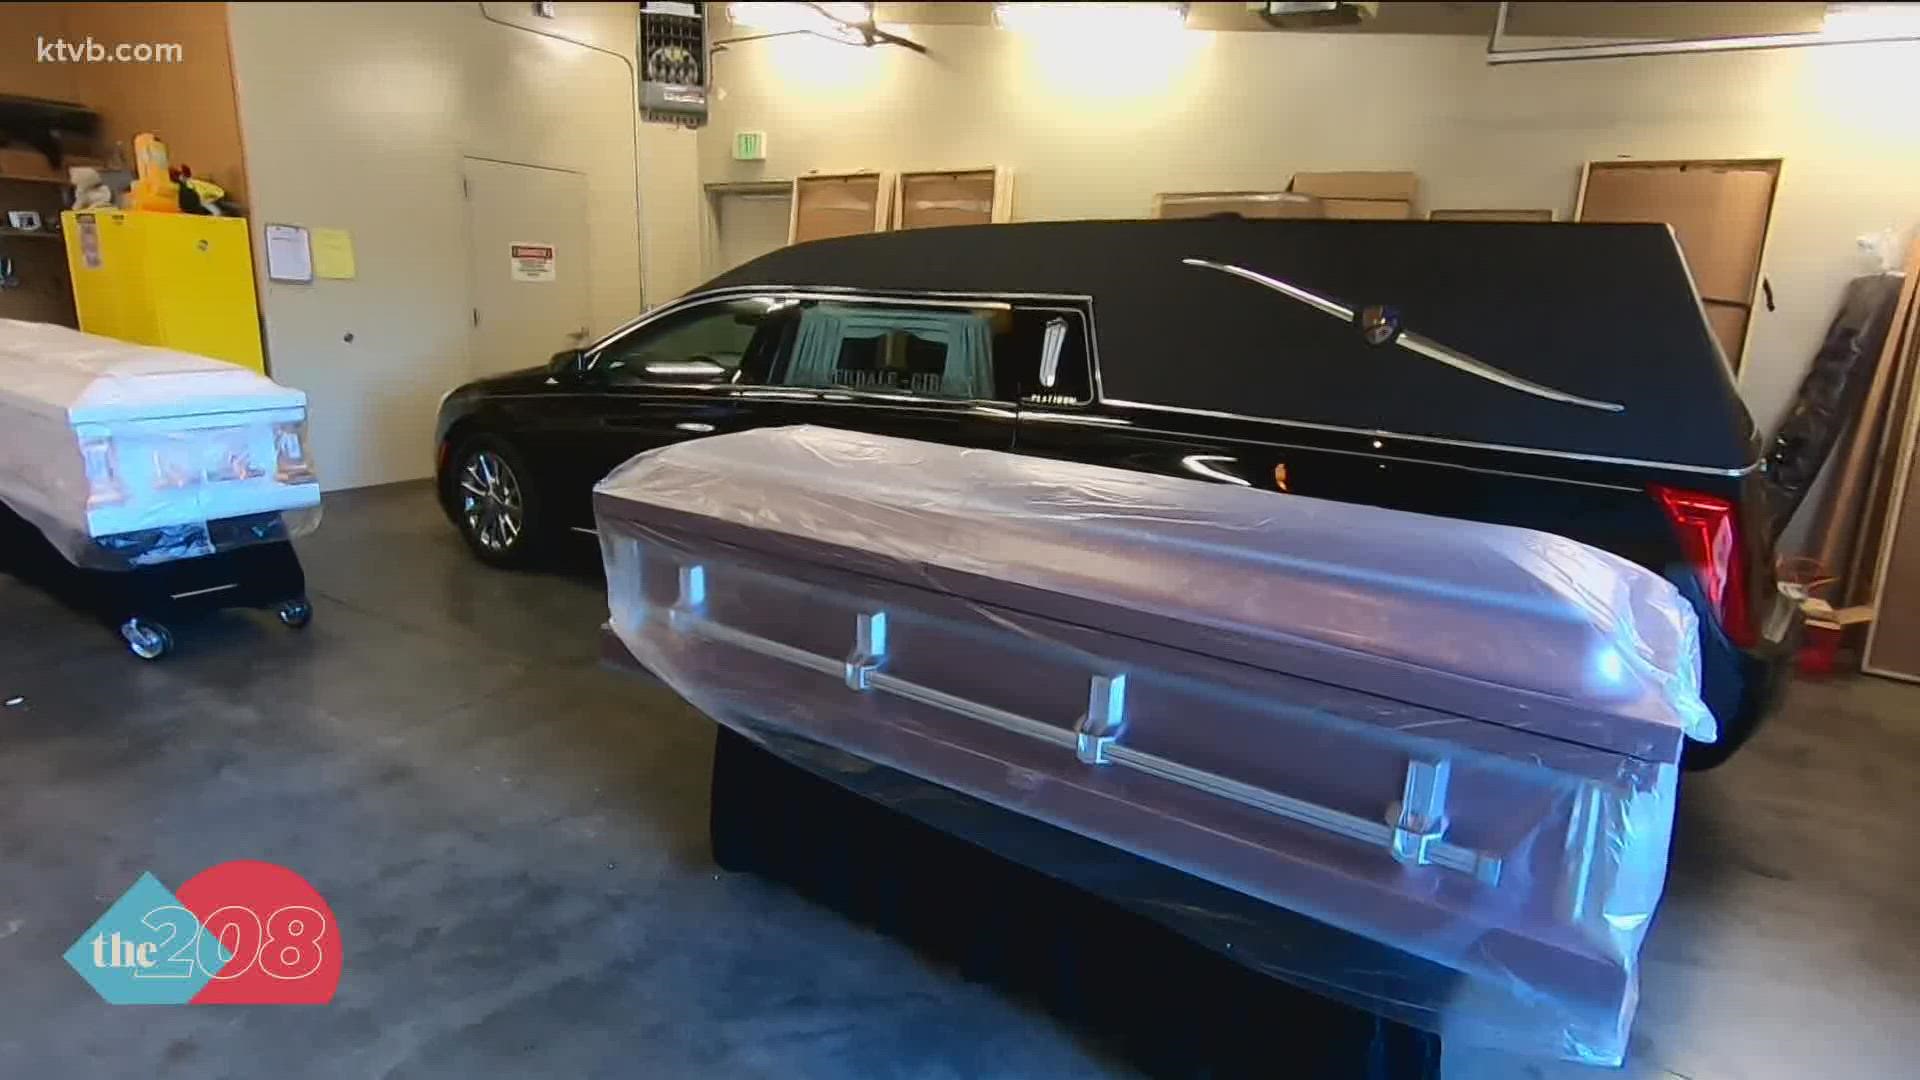 Cloverdale Funeral Home has brought in a refrigerated trailer to store remains awaiting cremation.